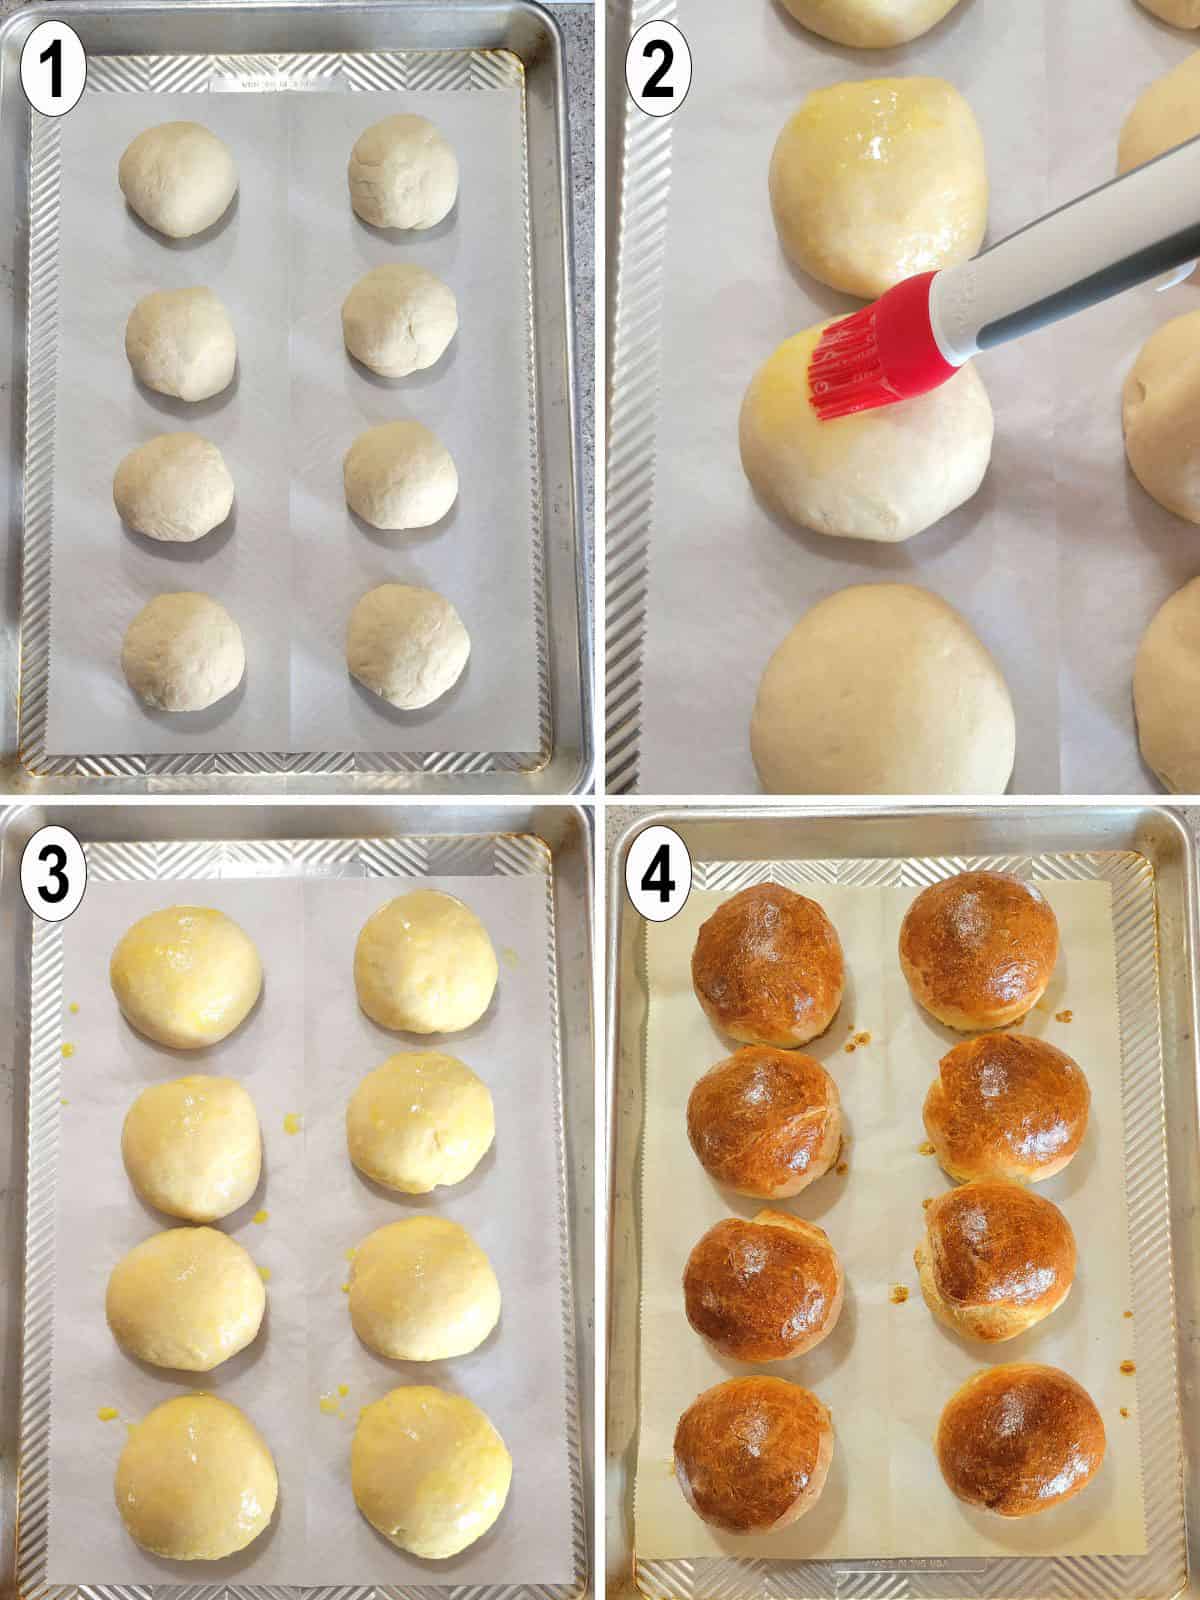 dough balls on a tray brushed with egg wash and baked